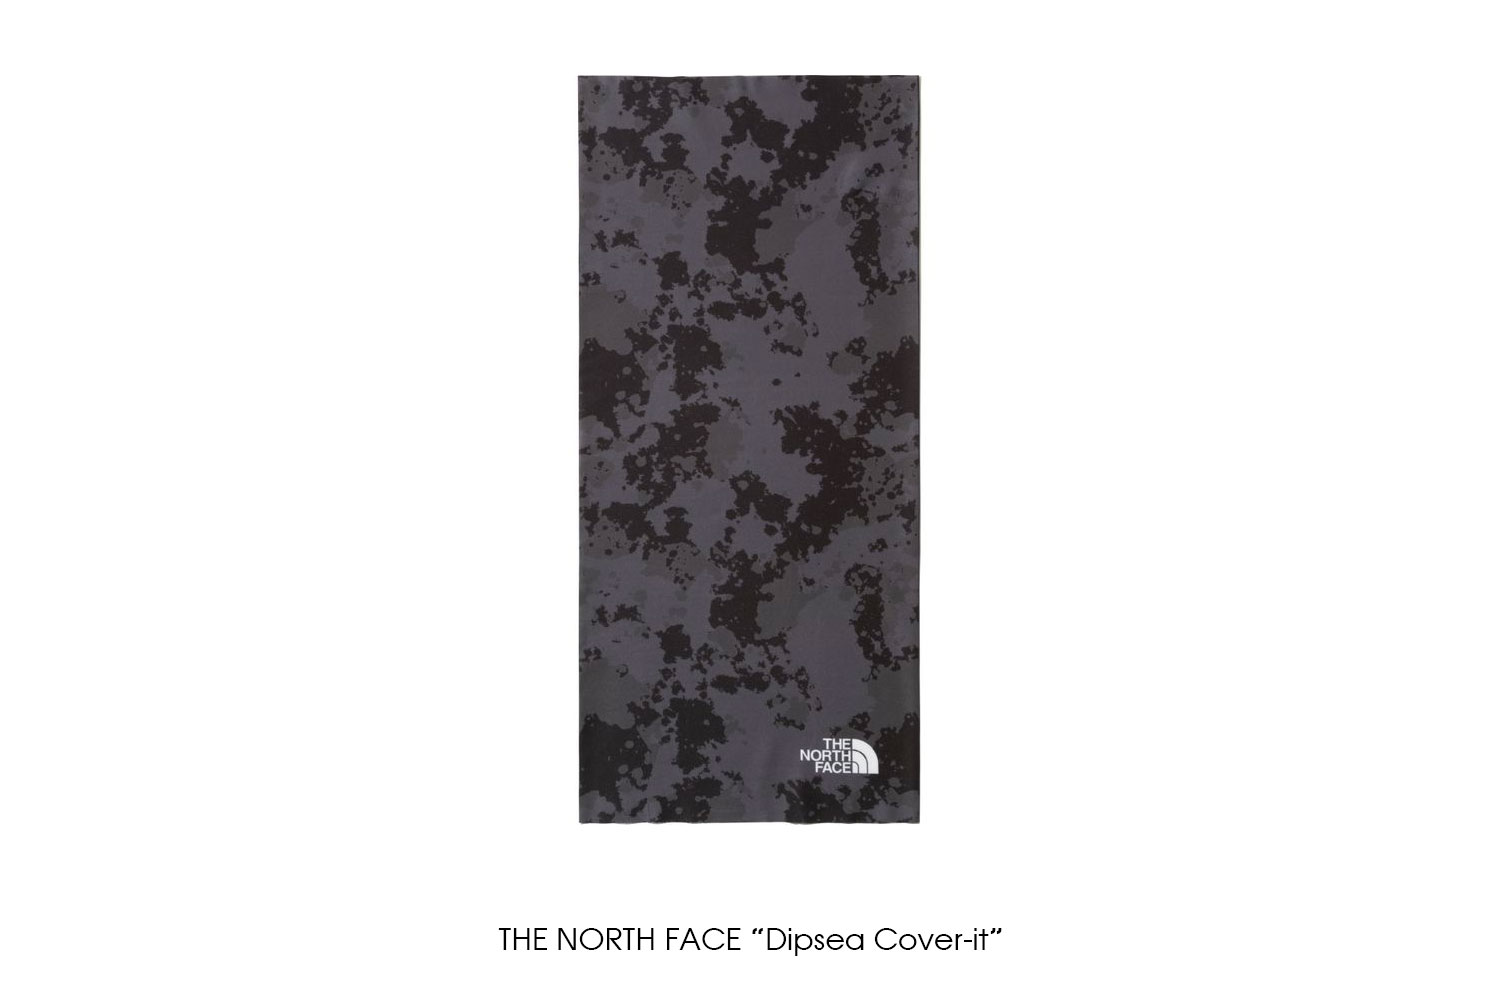 THE NORTH FACE "Dipsea Cover-it"